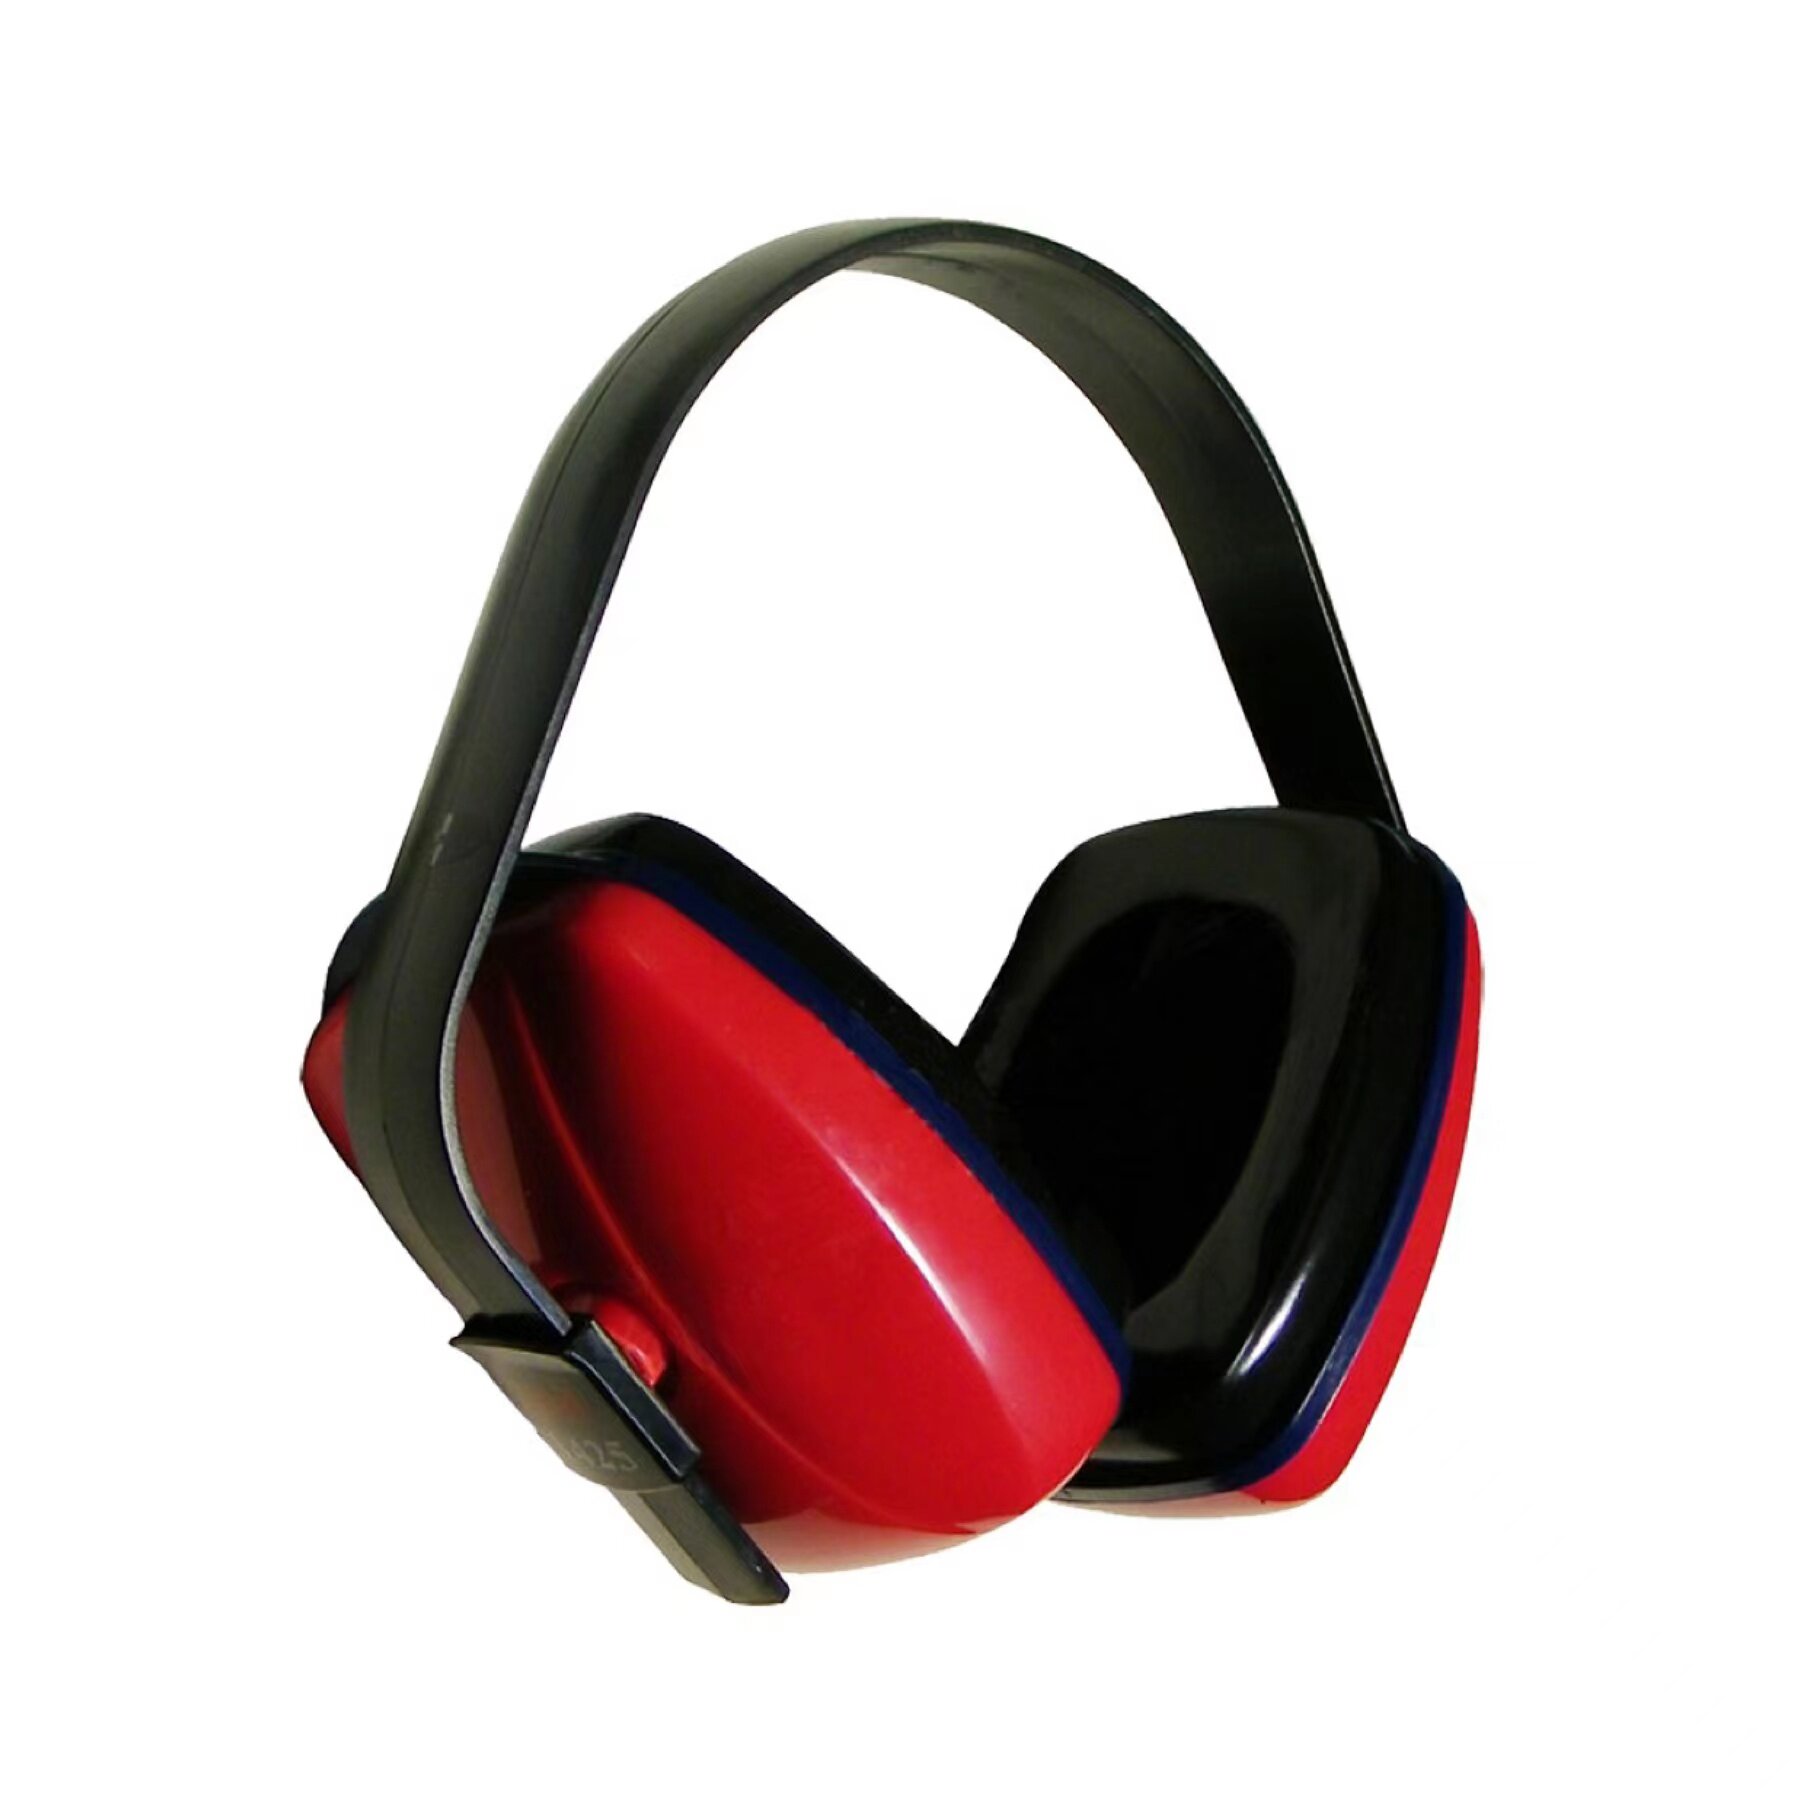 3M Comfortable Over-The-Head Ear Defenders For Protecting Against Noise